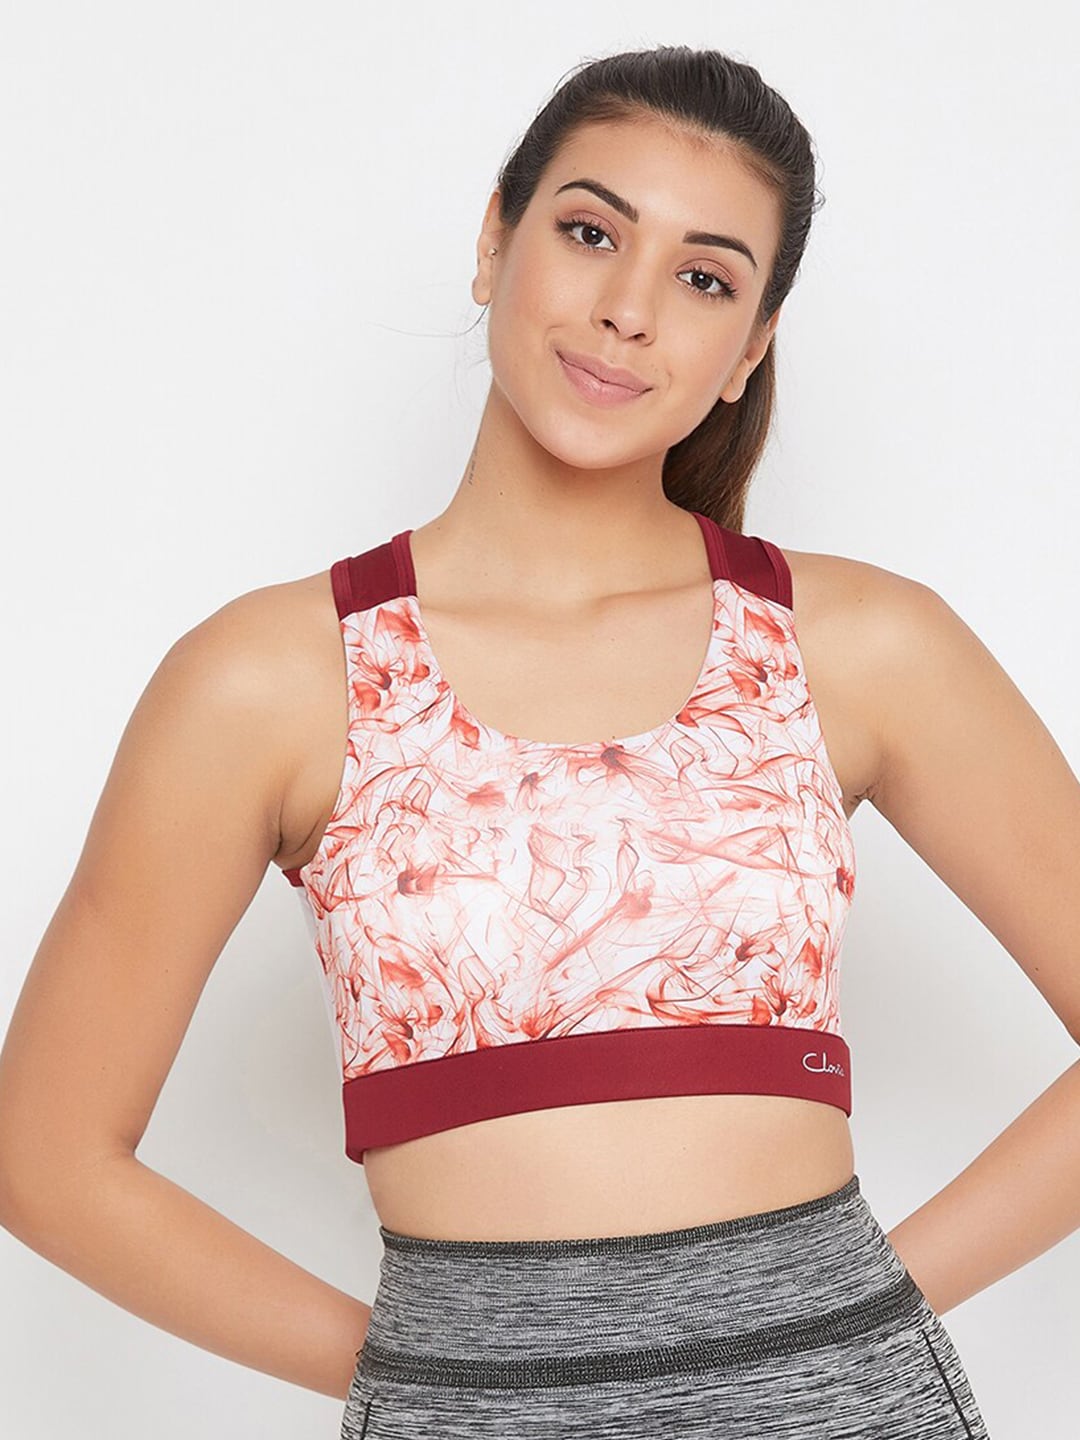 Clovia White & Maroon Printed Non-Wired Lightly Padded Workout Bra BR2054A09XXL Price in India